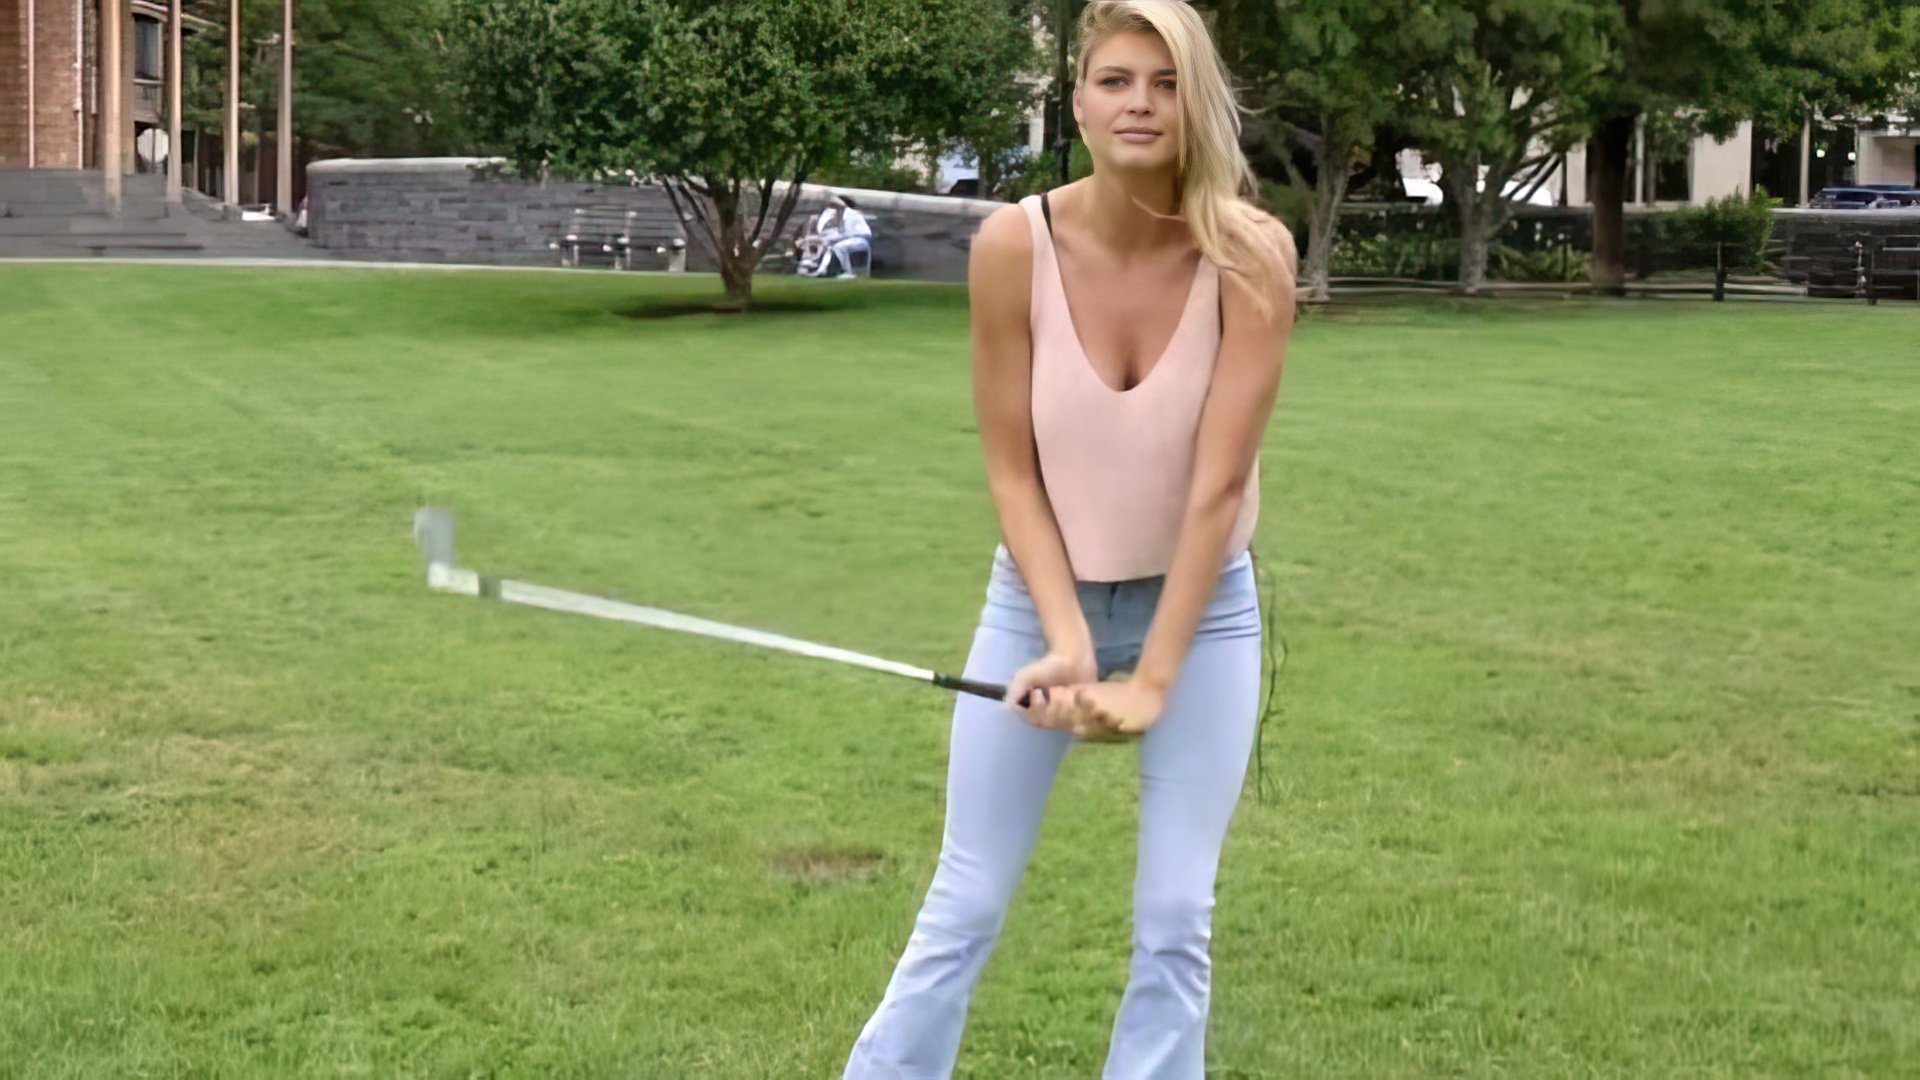 As a child, Kelly Rohrbach was the star of the golf team